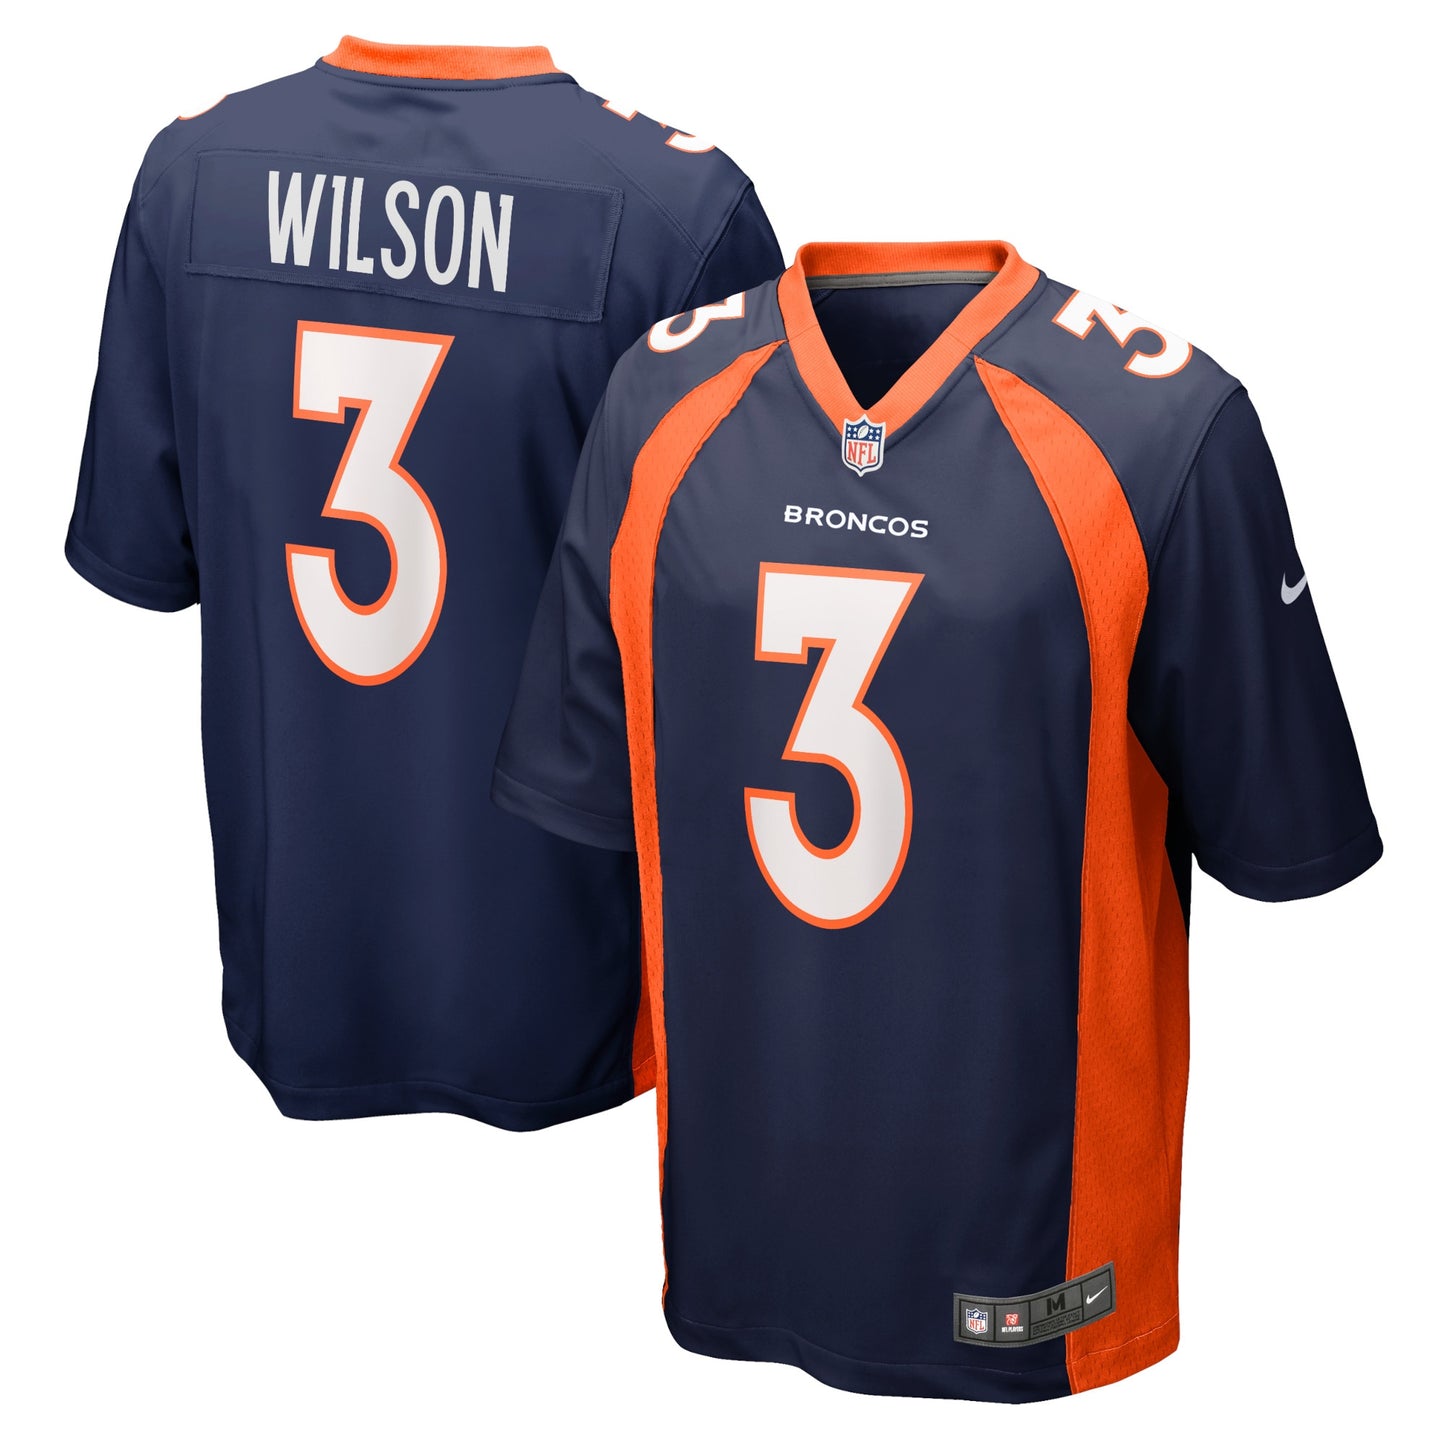 Russell Wilson Denver Broncos Nike Youth Game Jersey - Navy